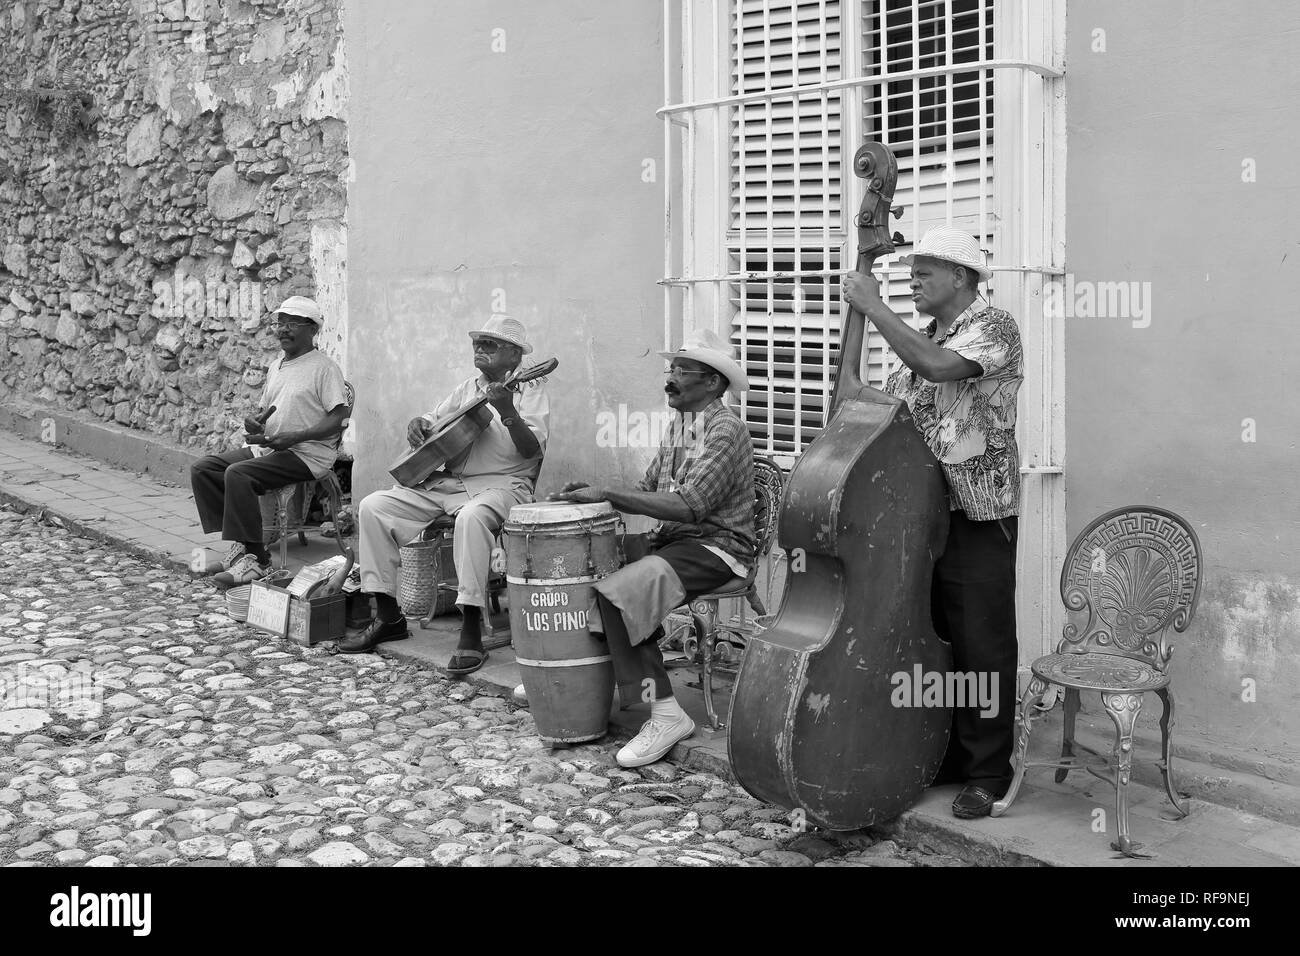 Havana, Cuba - Music and music albums in Havana and almost all cities, music groups on the streets. Tourists are happy and have fun with dancing. Stock Photo